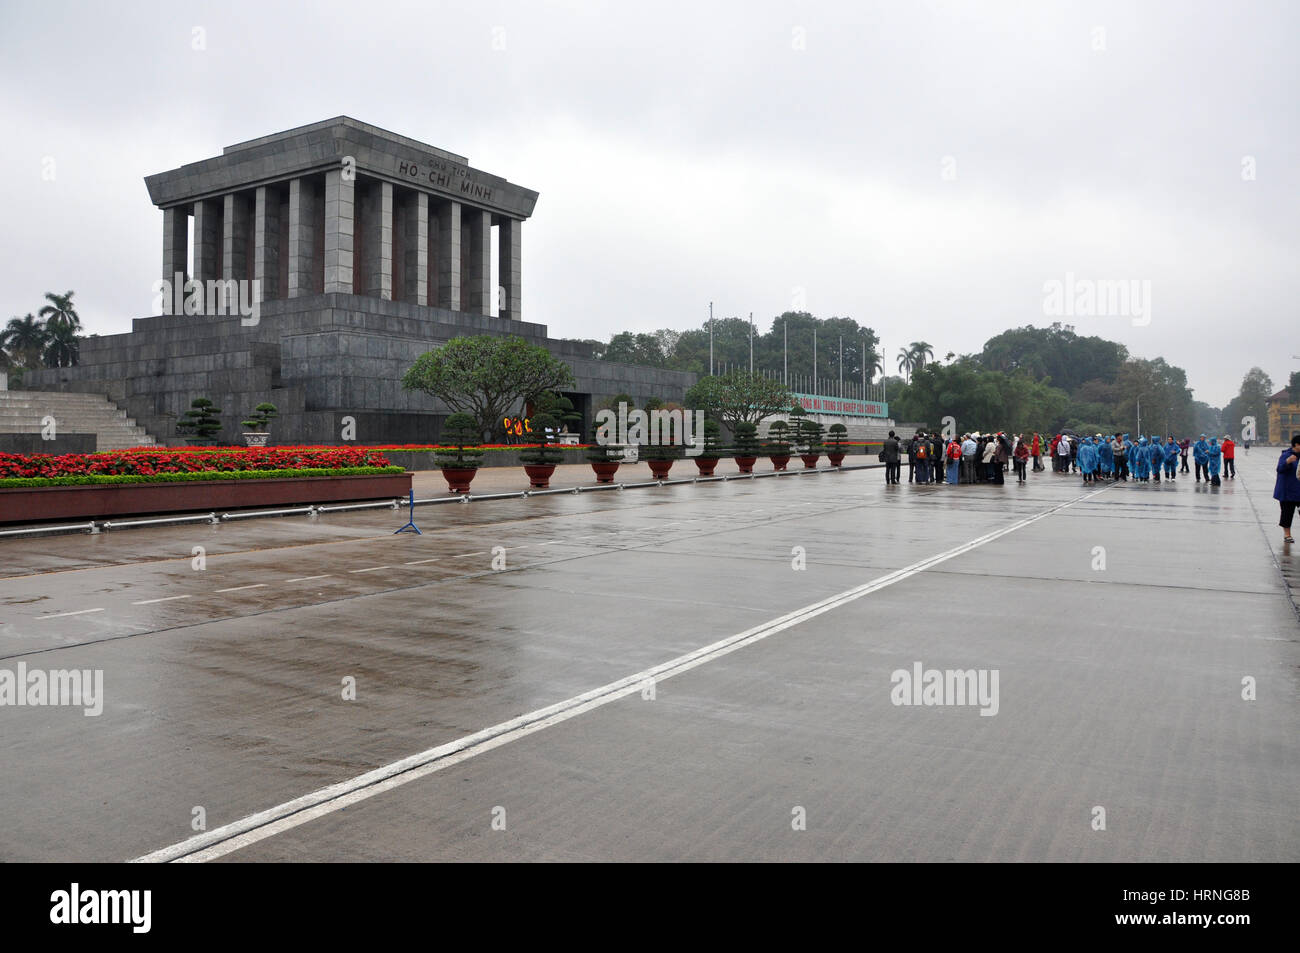 HANOI, VIETNAM - FEBRUARY 19, 2013: Vietnamese uniformed sentries standing near the Ho Chi Minh mausoleum for the Changing the Guard Ceremony in Hanoi Stock Photo